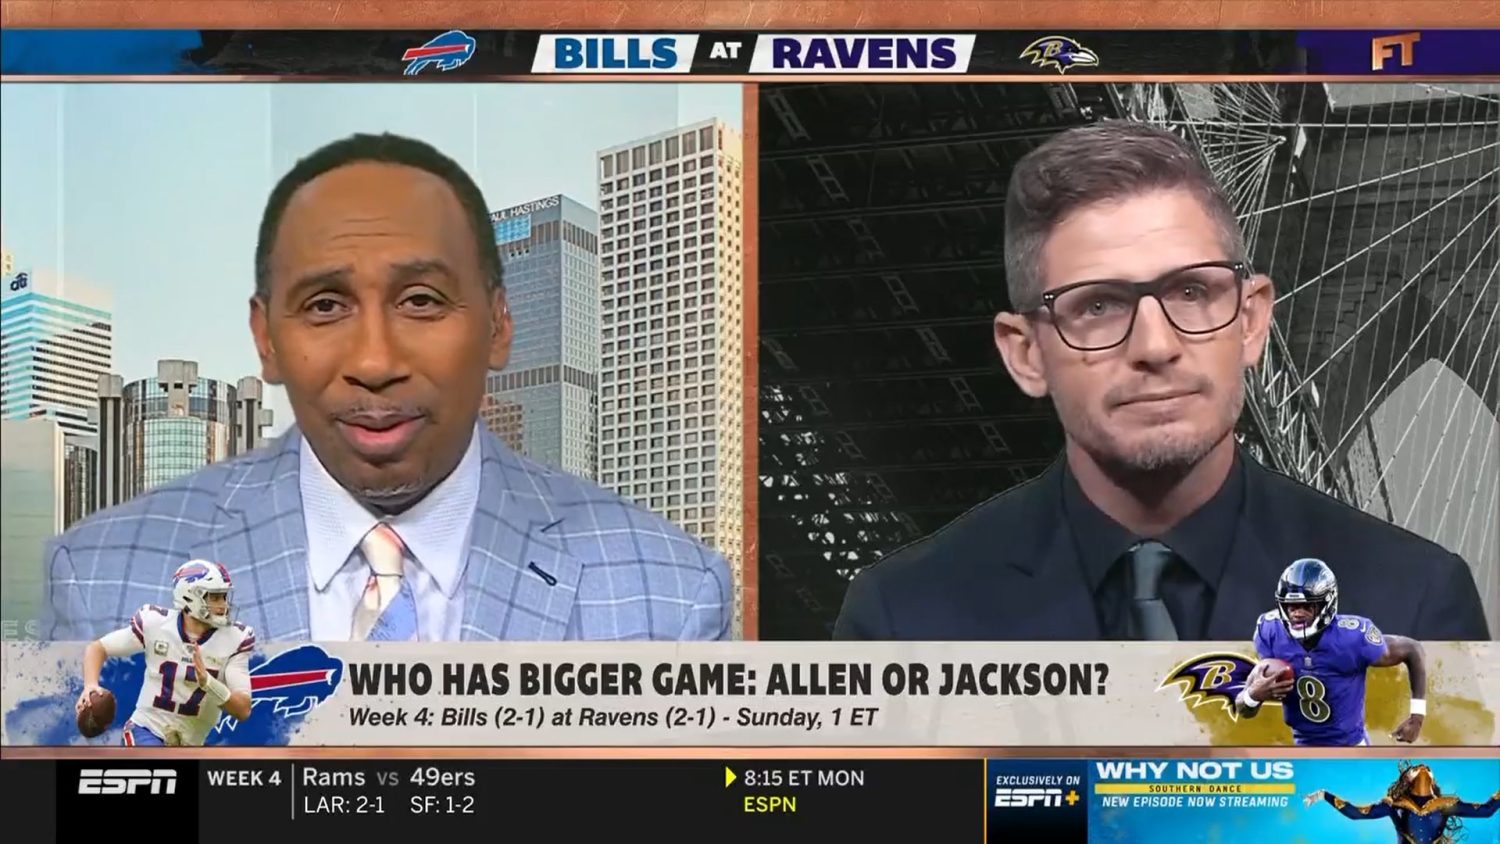 Stephen A. Smith questions Dan Orlovsky’s inadvertent use of potentially offensive phrase